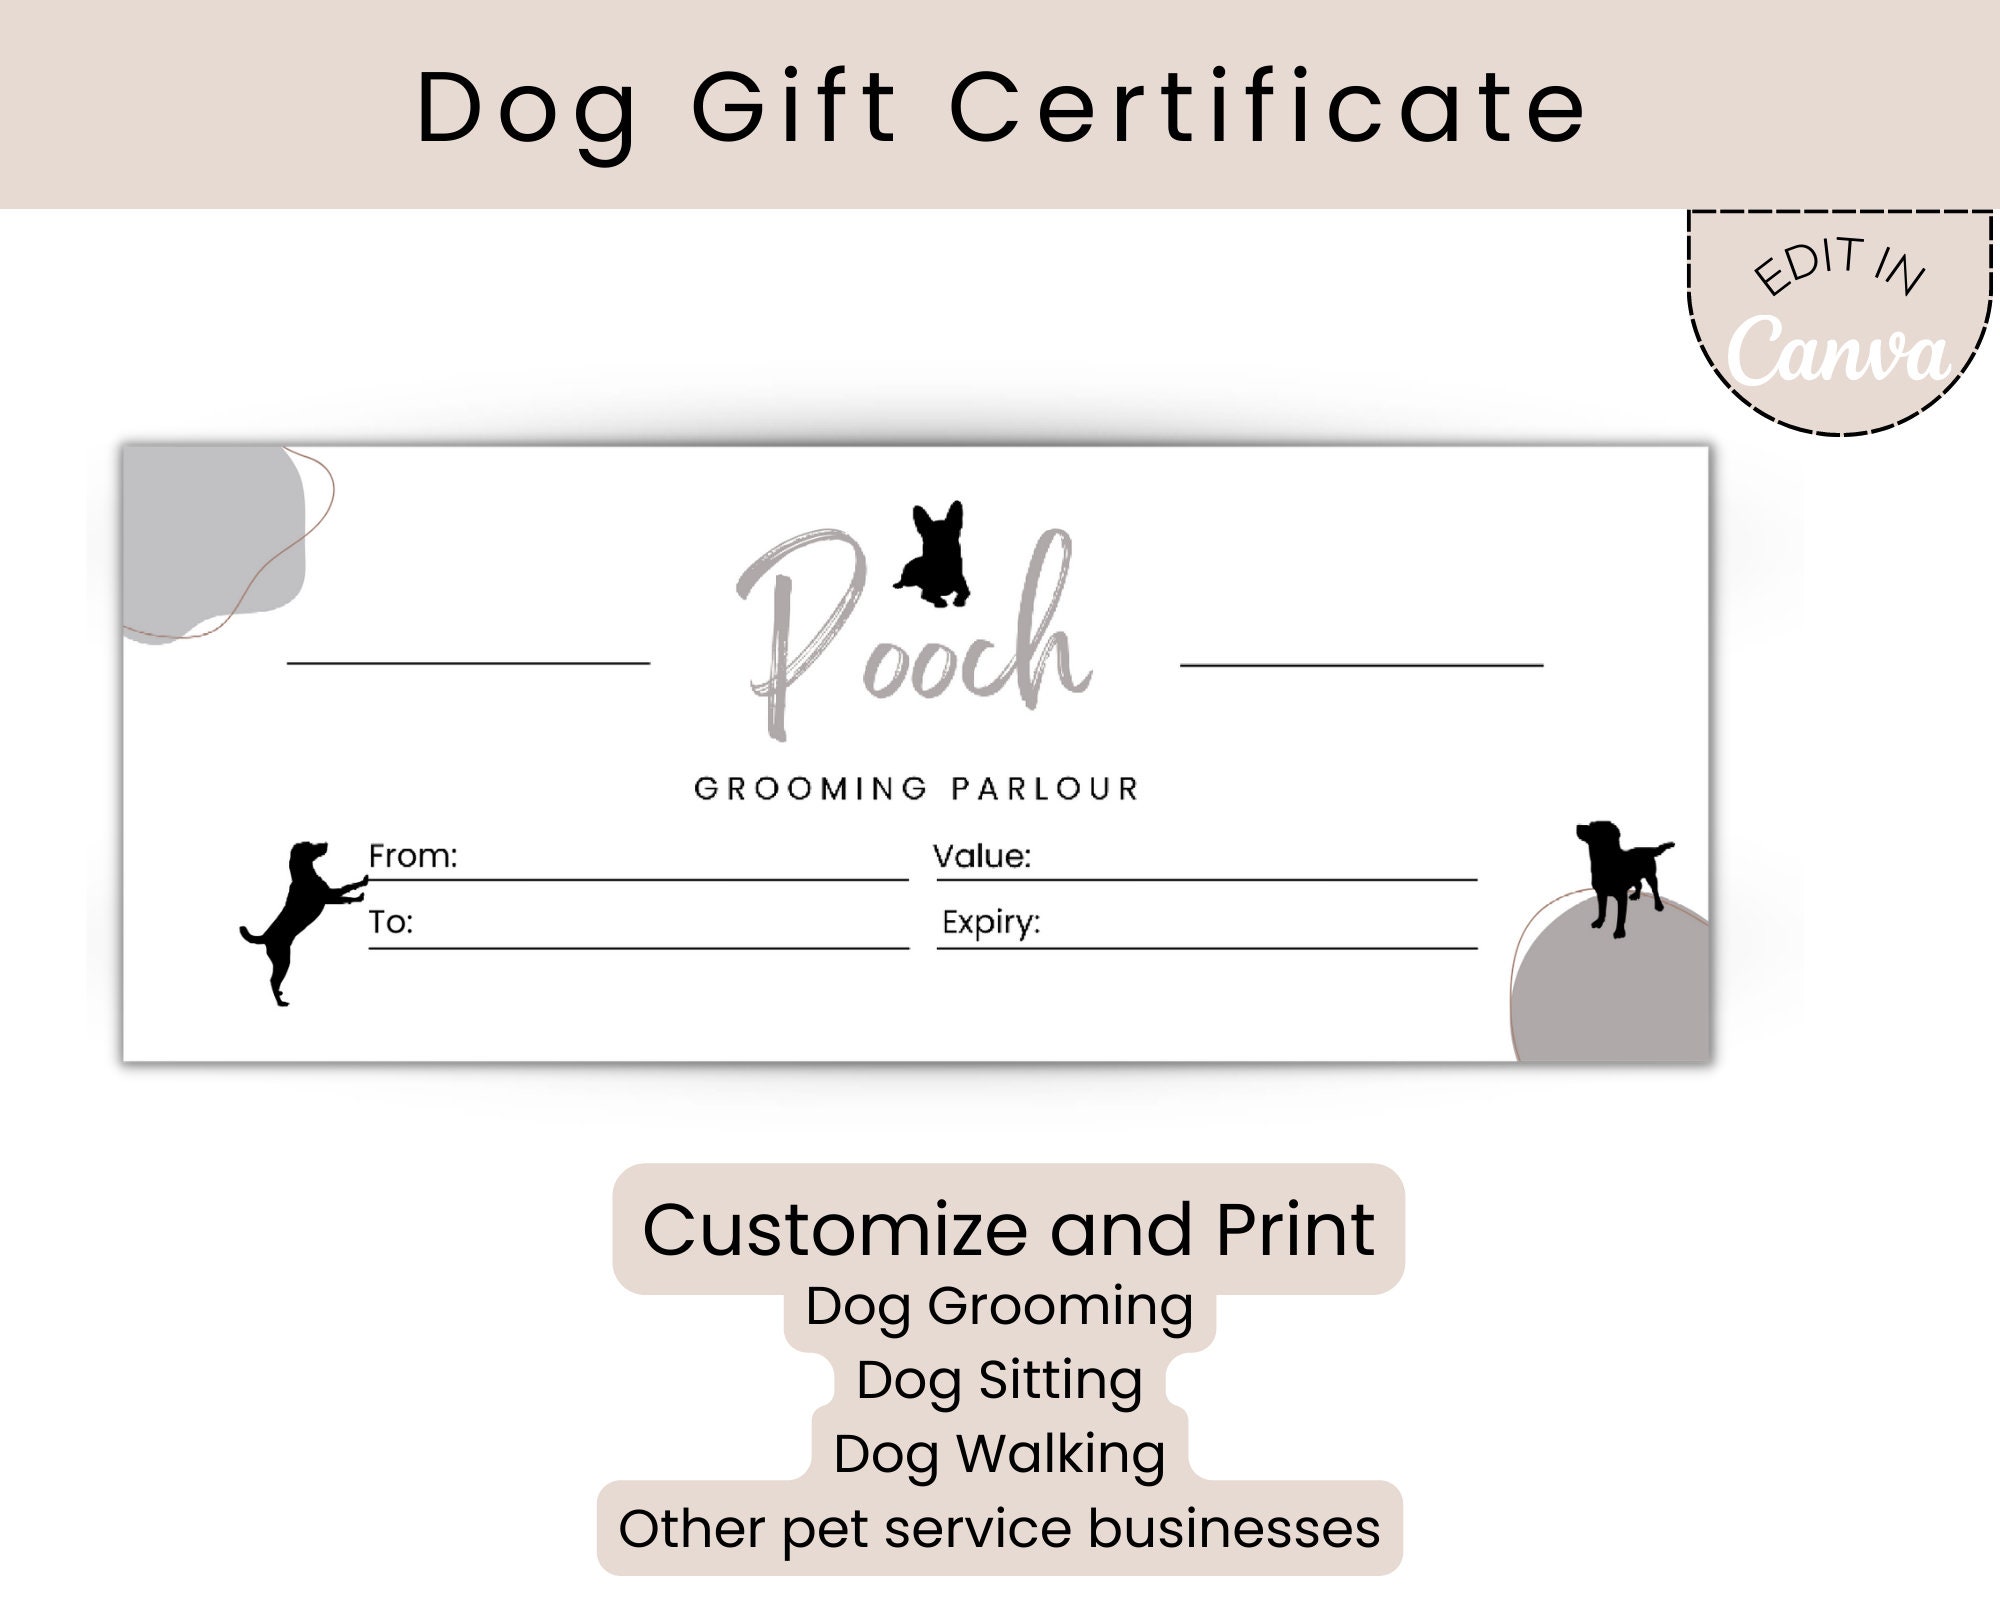 Gift Certificates — K9 Fun-Time Secure Dog Exercise Facilities